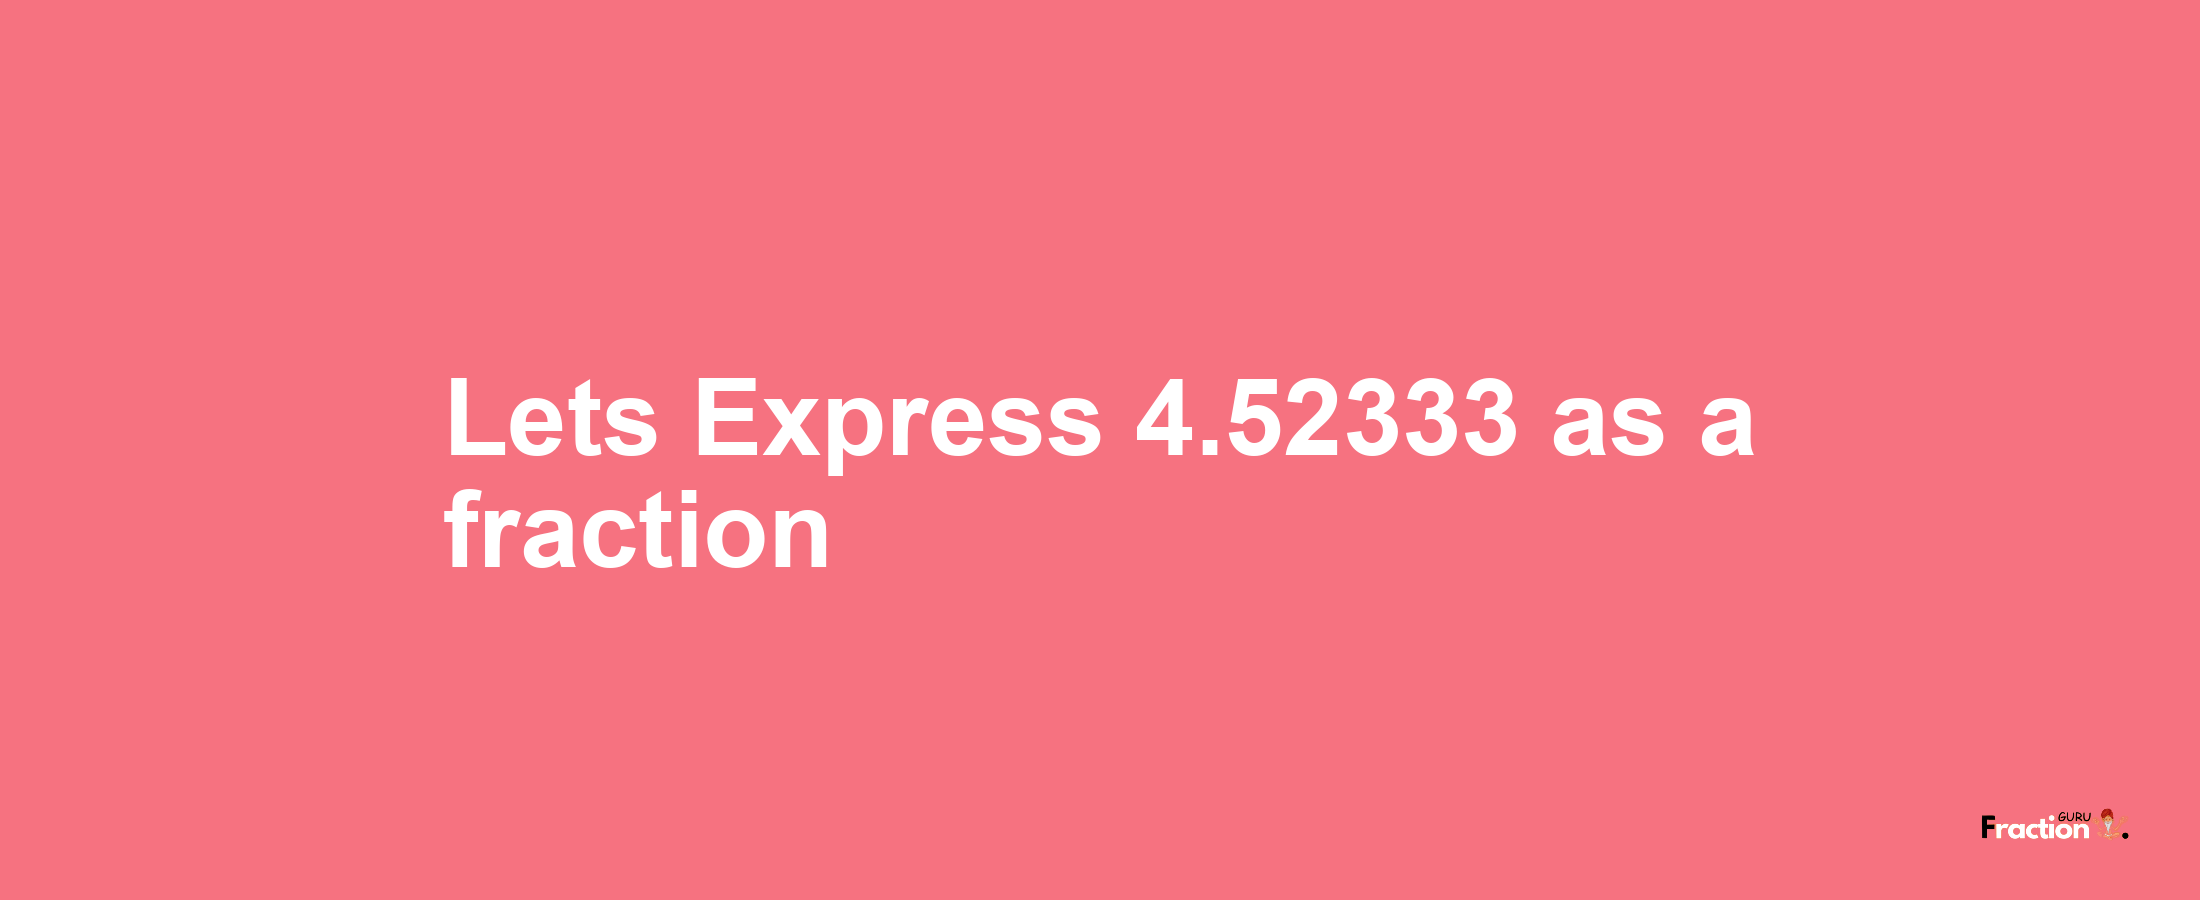 Lets Express 4.52333 as afraction